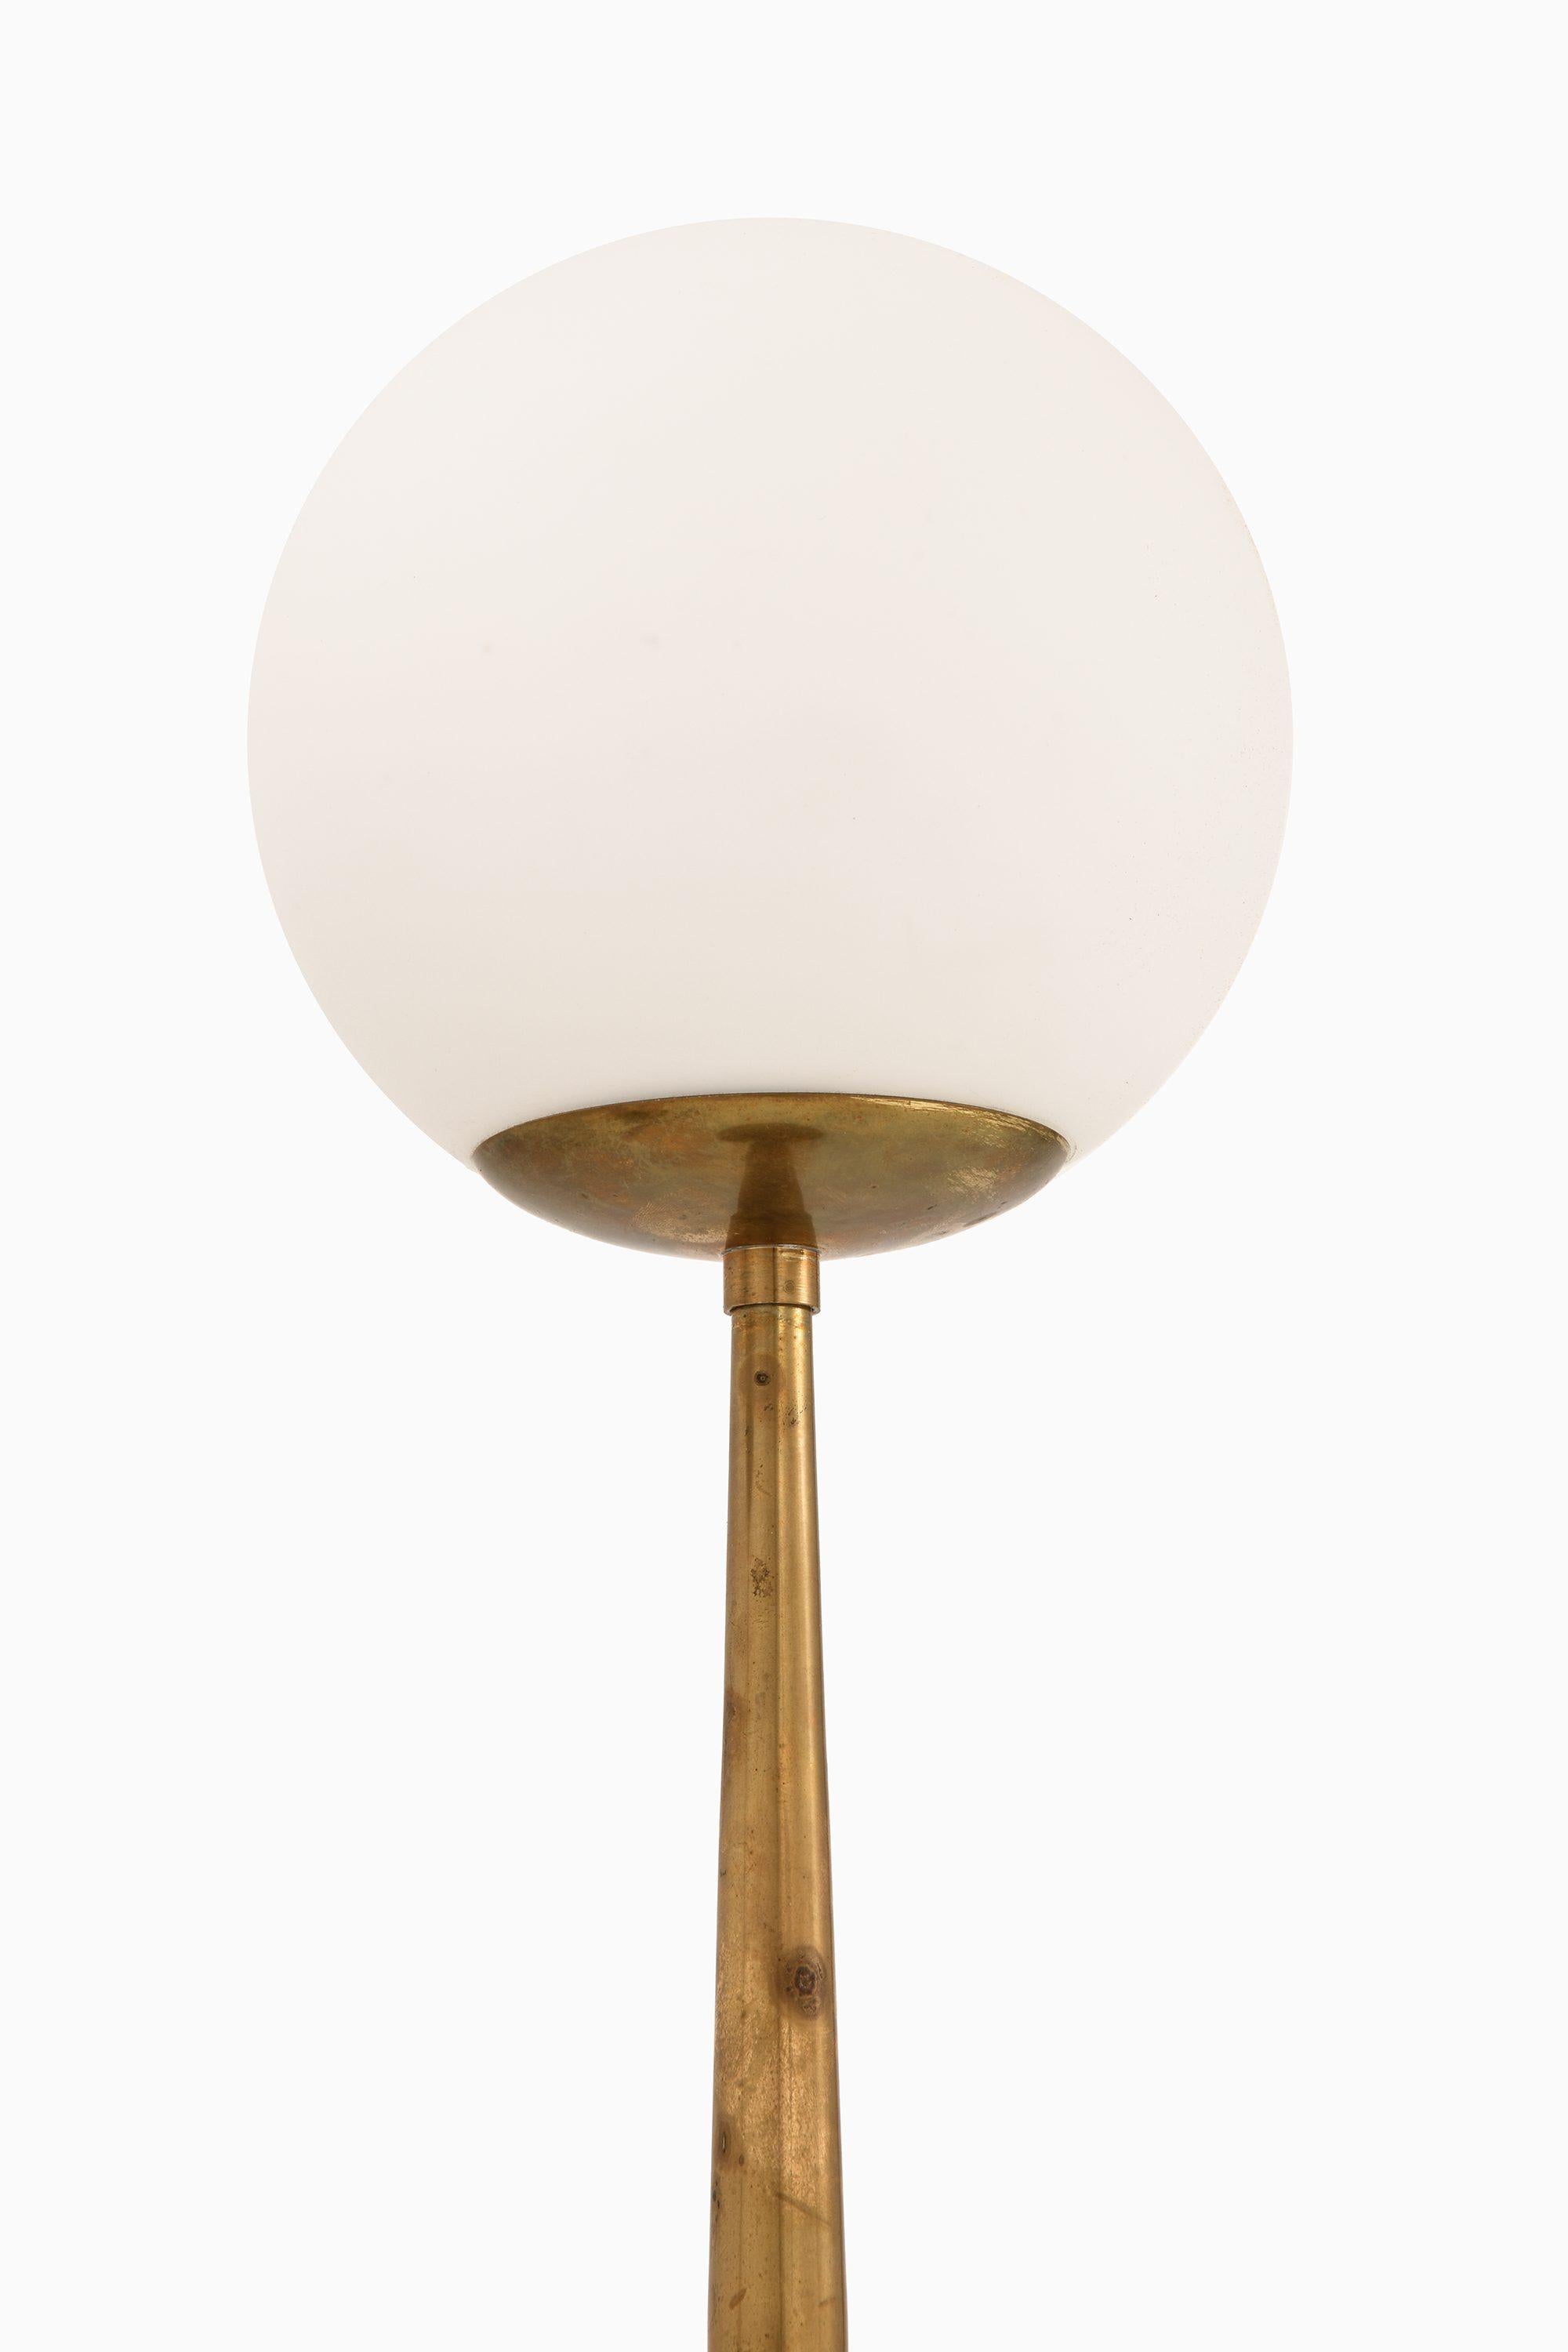 Pair of Table Lamp in Brass and Matte Opaline Glass by Hans-Agne Jakobsson, 1950’s

Additional Information:
Material: Brass and matte opaline glass
Style: Mid century, Scandinavian
Rare pair of table lamp model B93
Produced by Hans-Agne Jakobsson AB